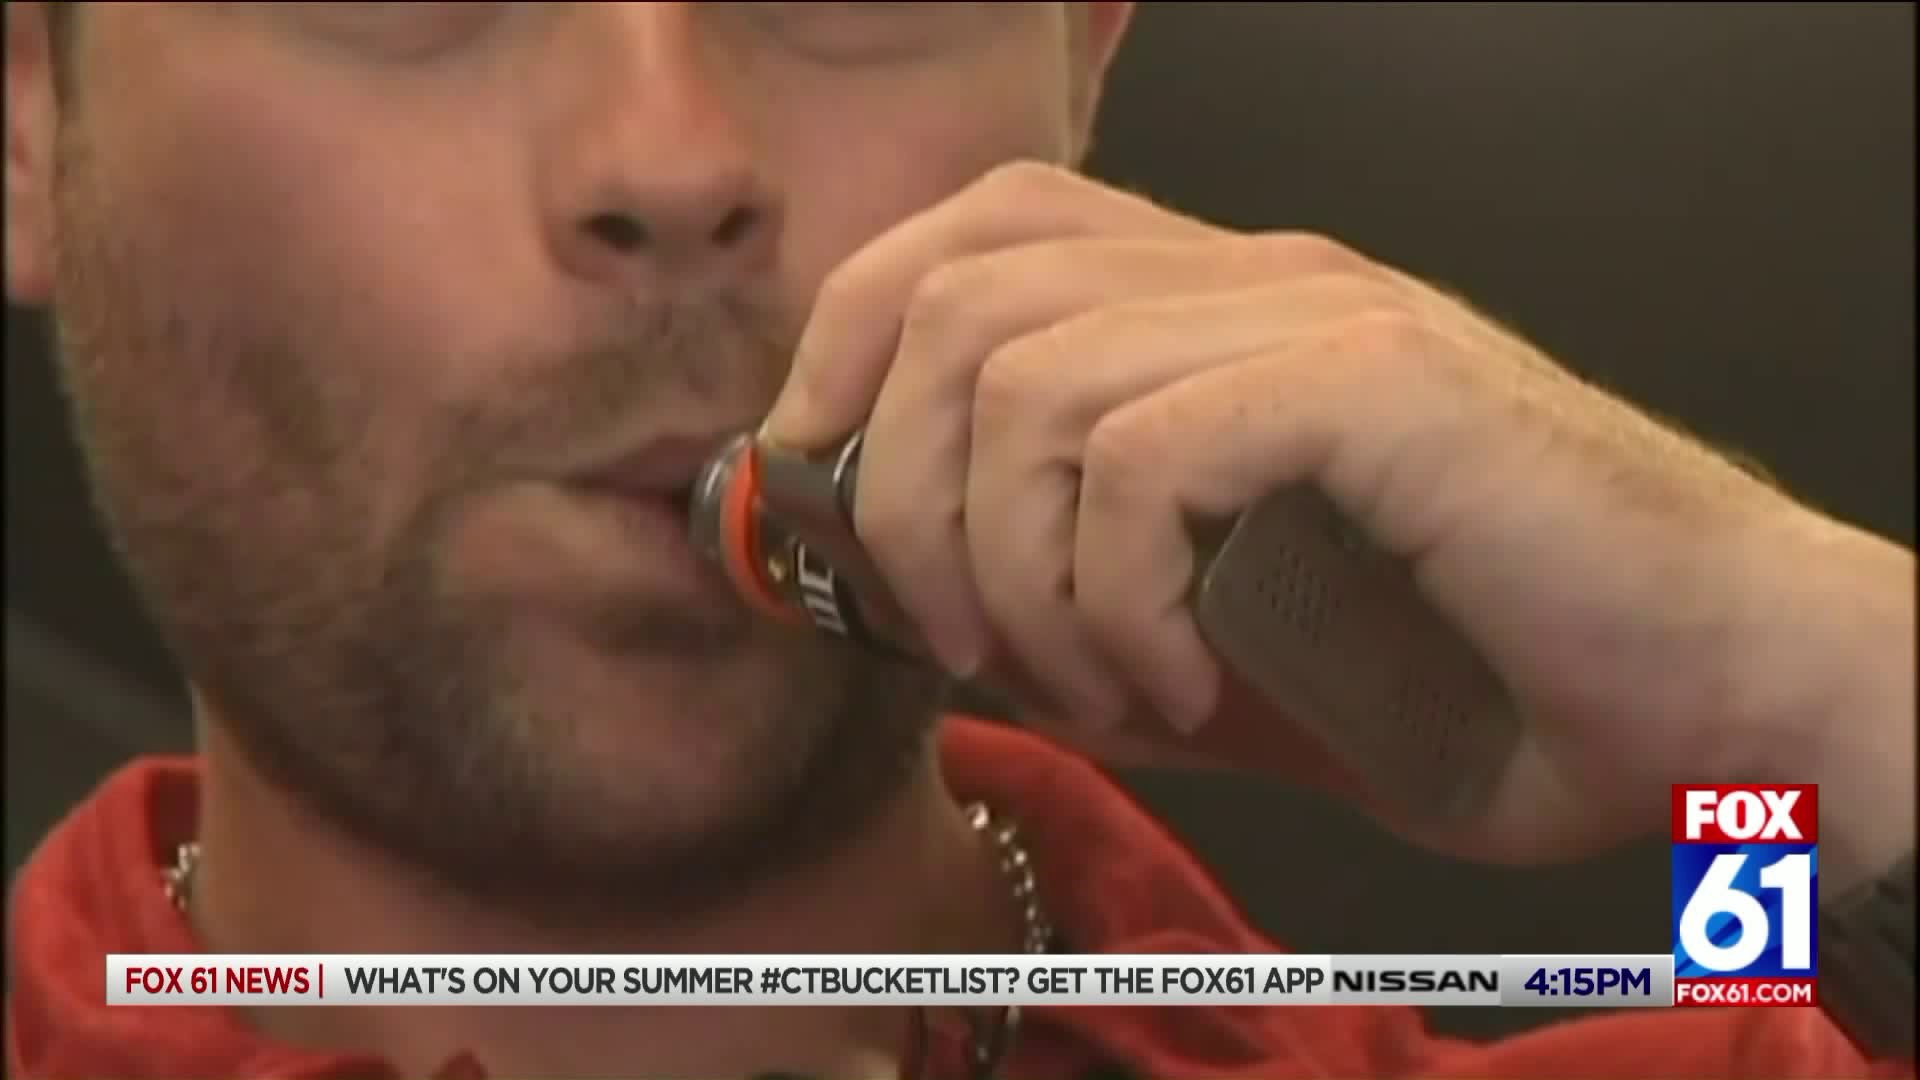 Norwich gas station owner discouraging customers from buying vaping products